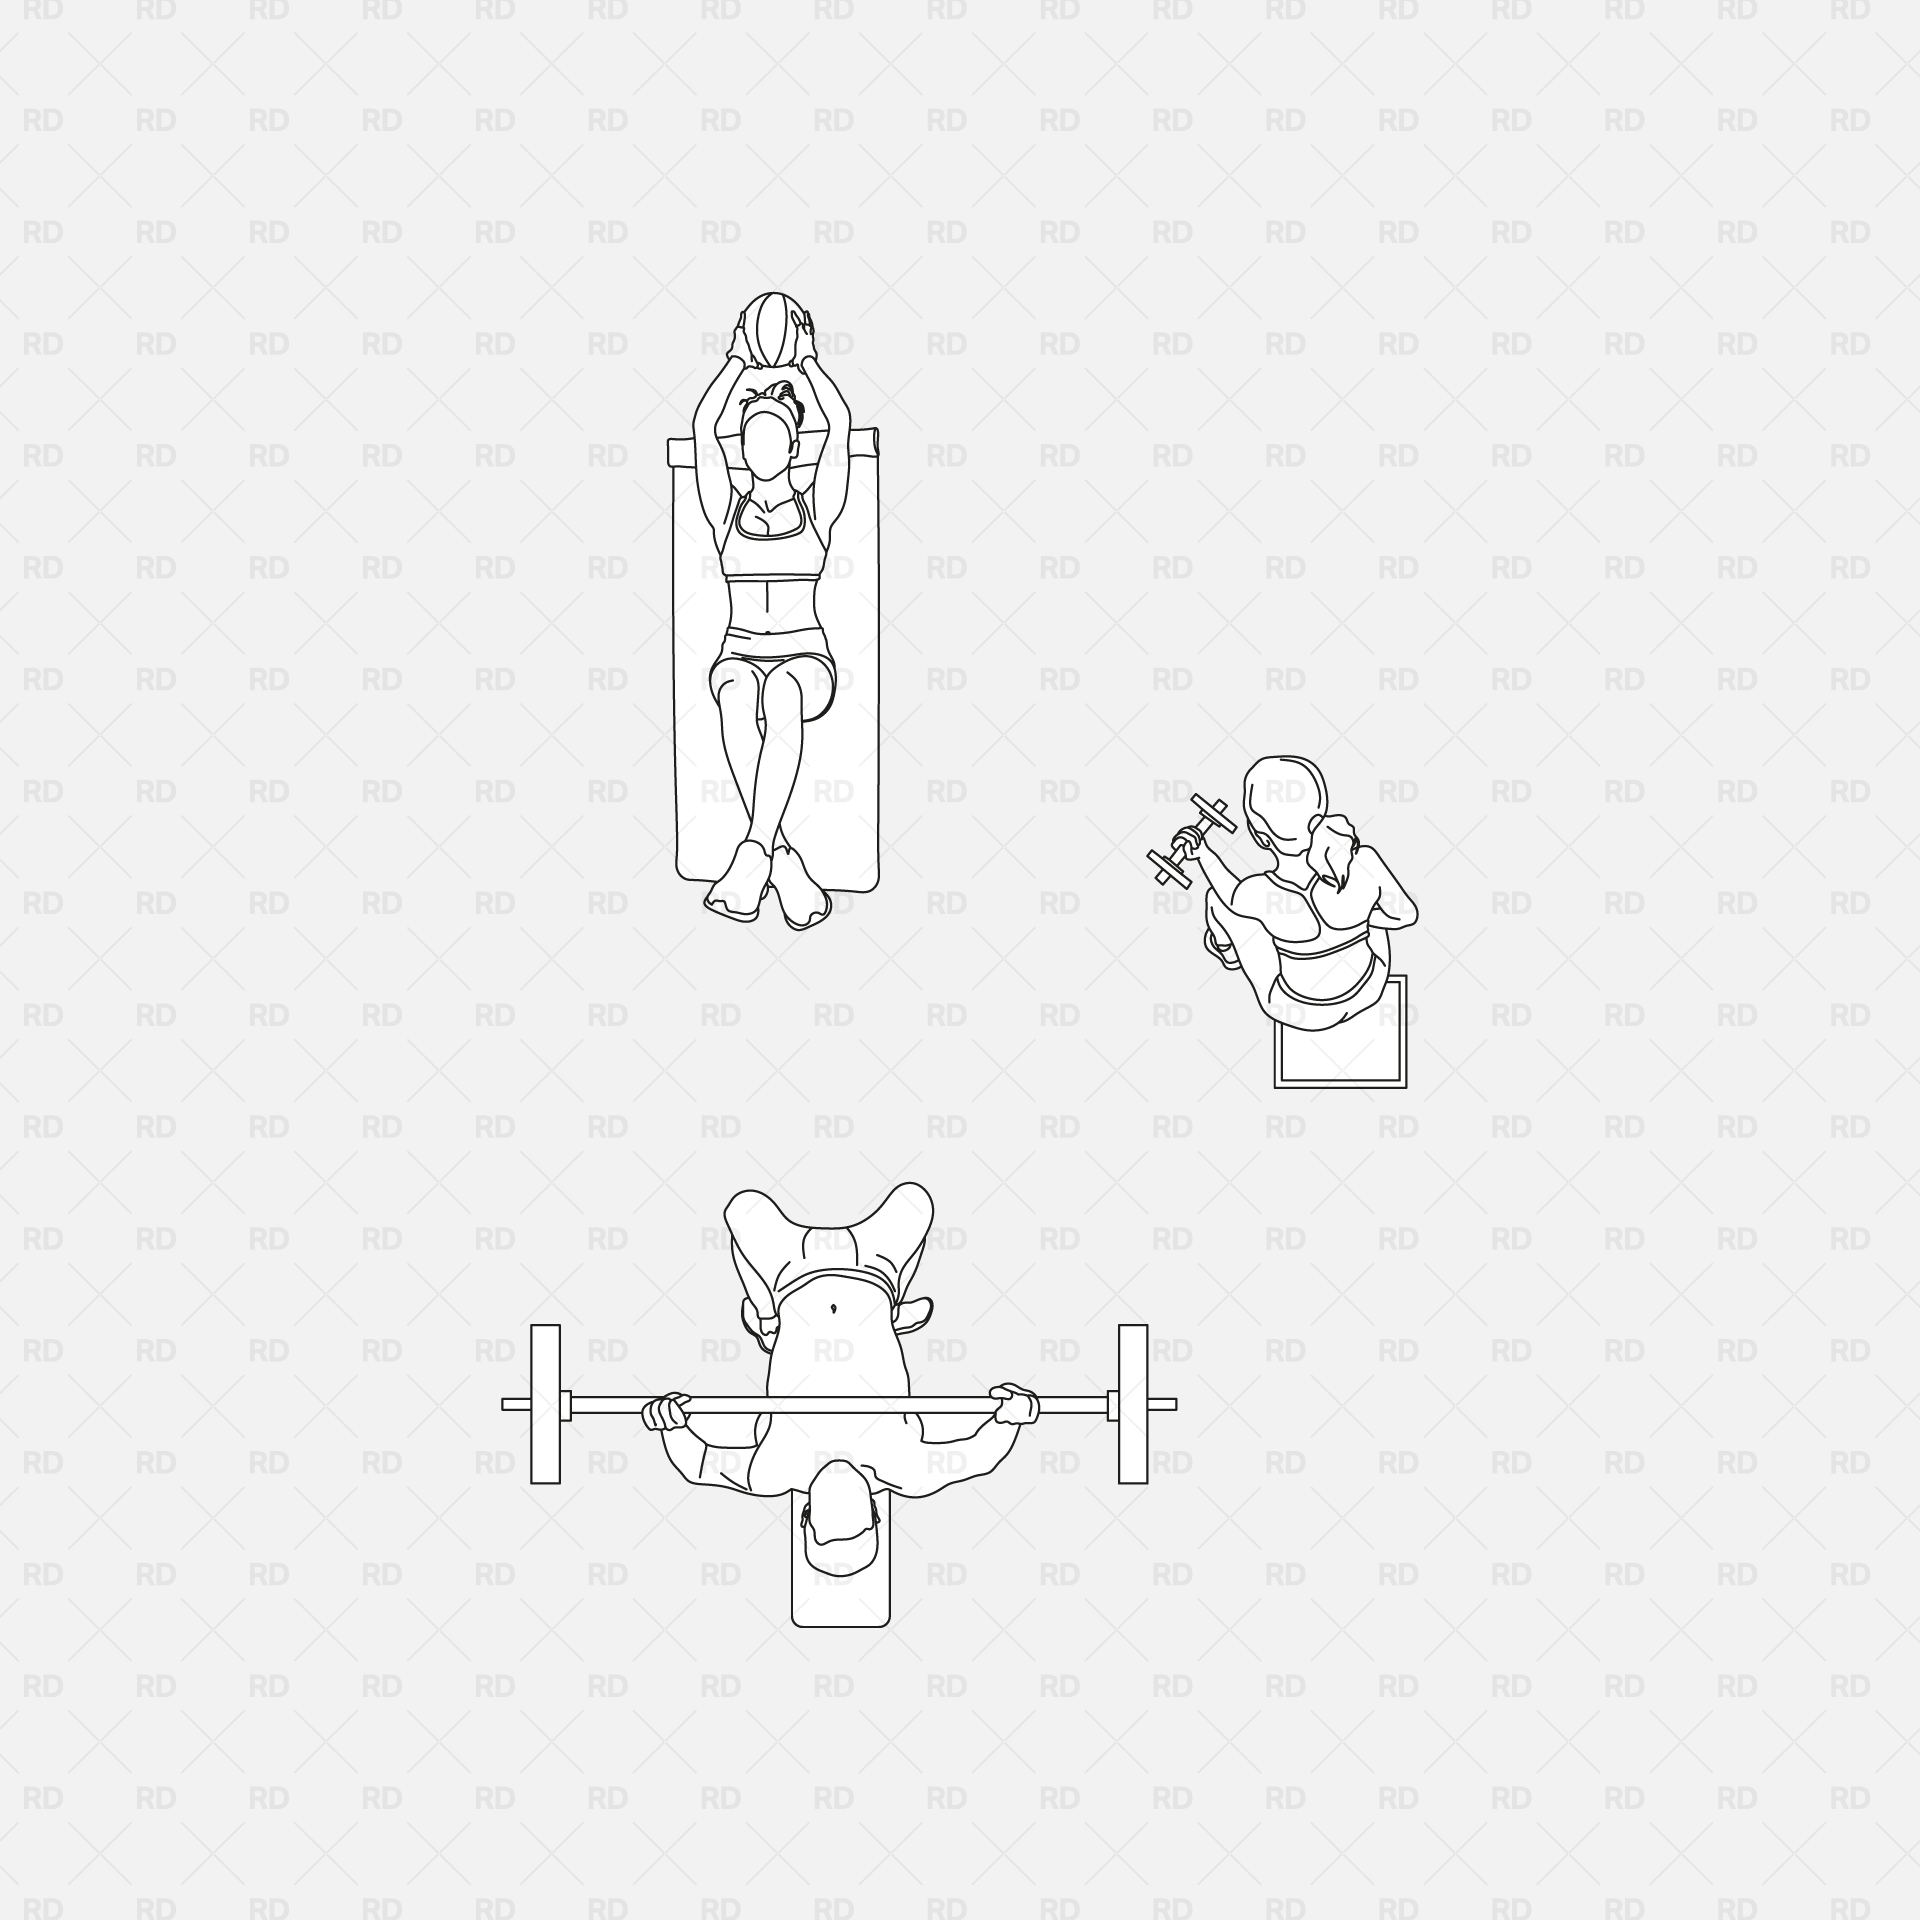 Revit 2D People at the Gym